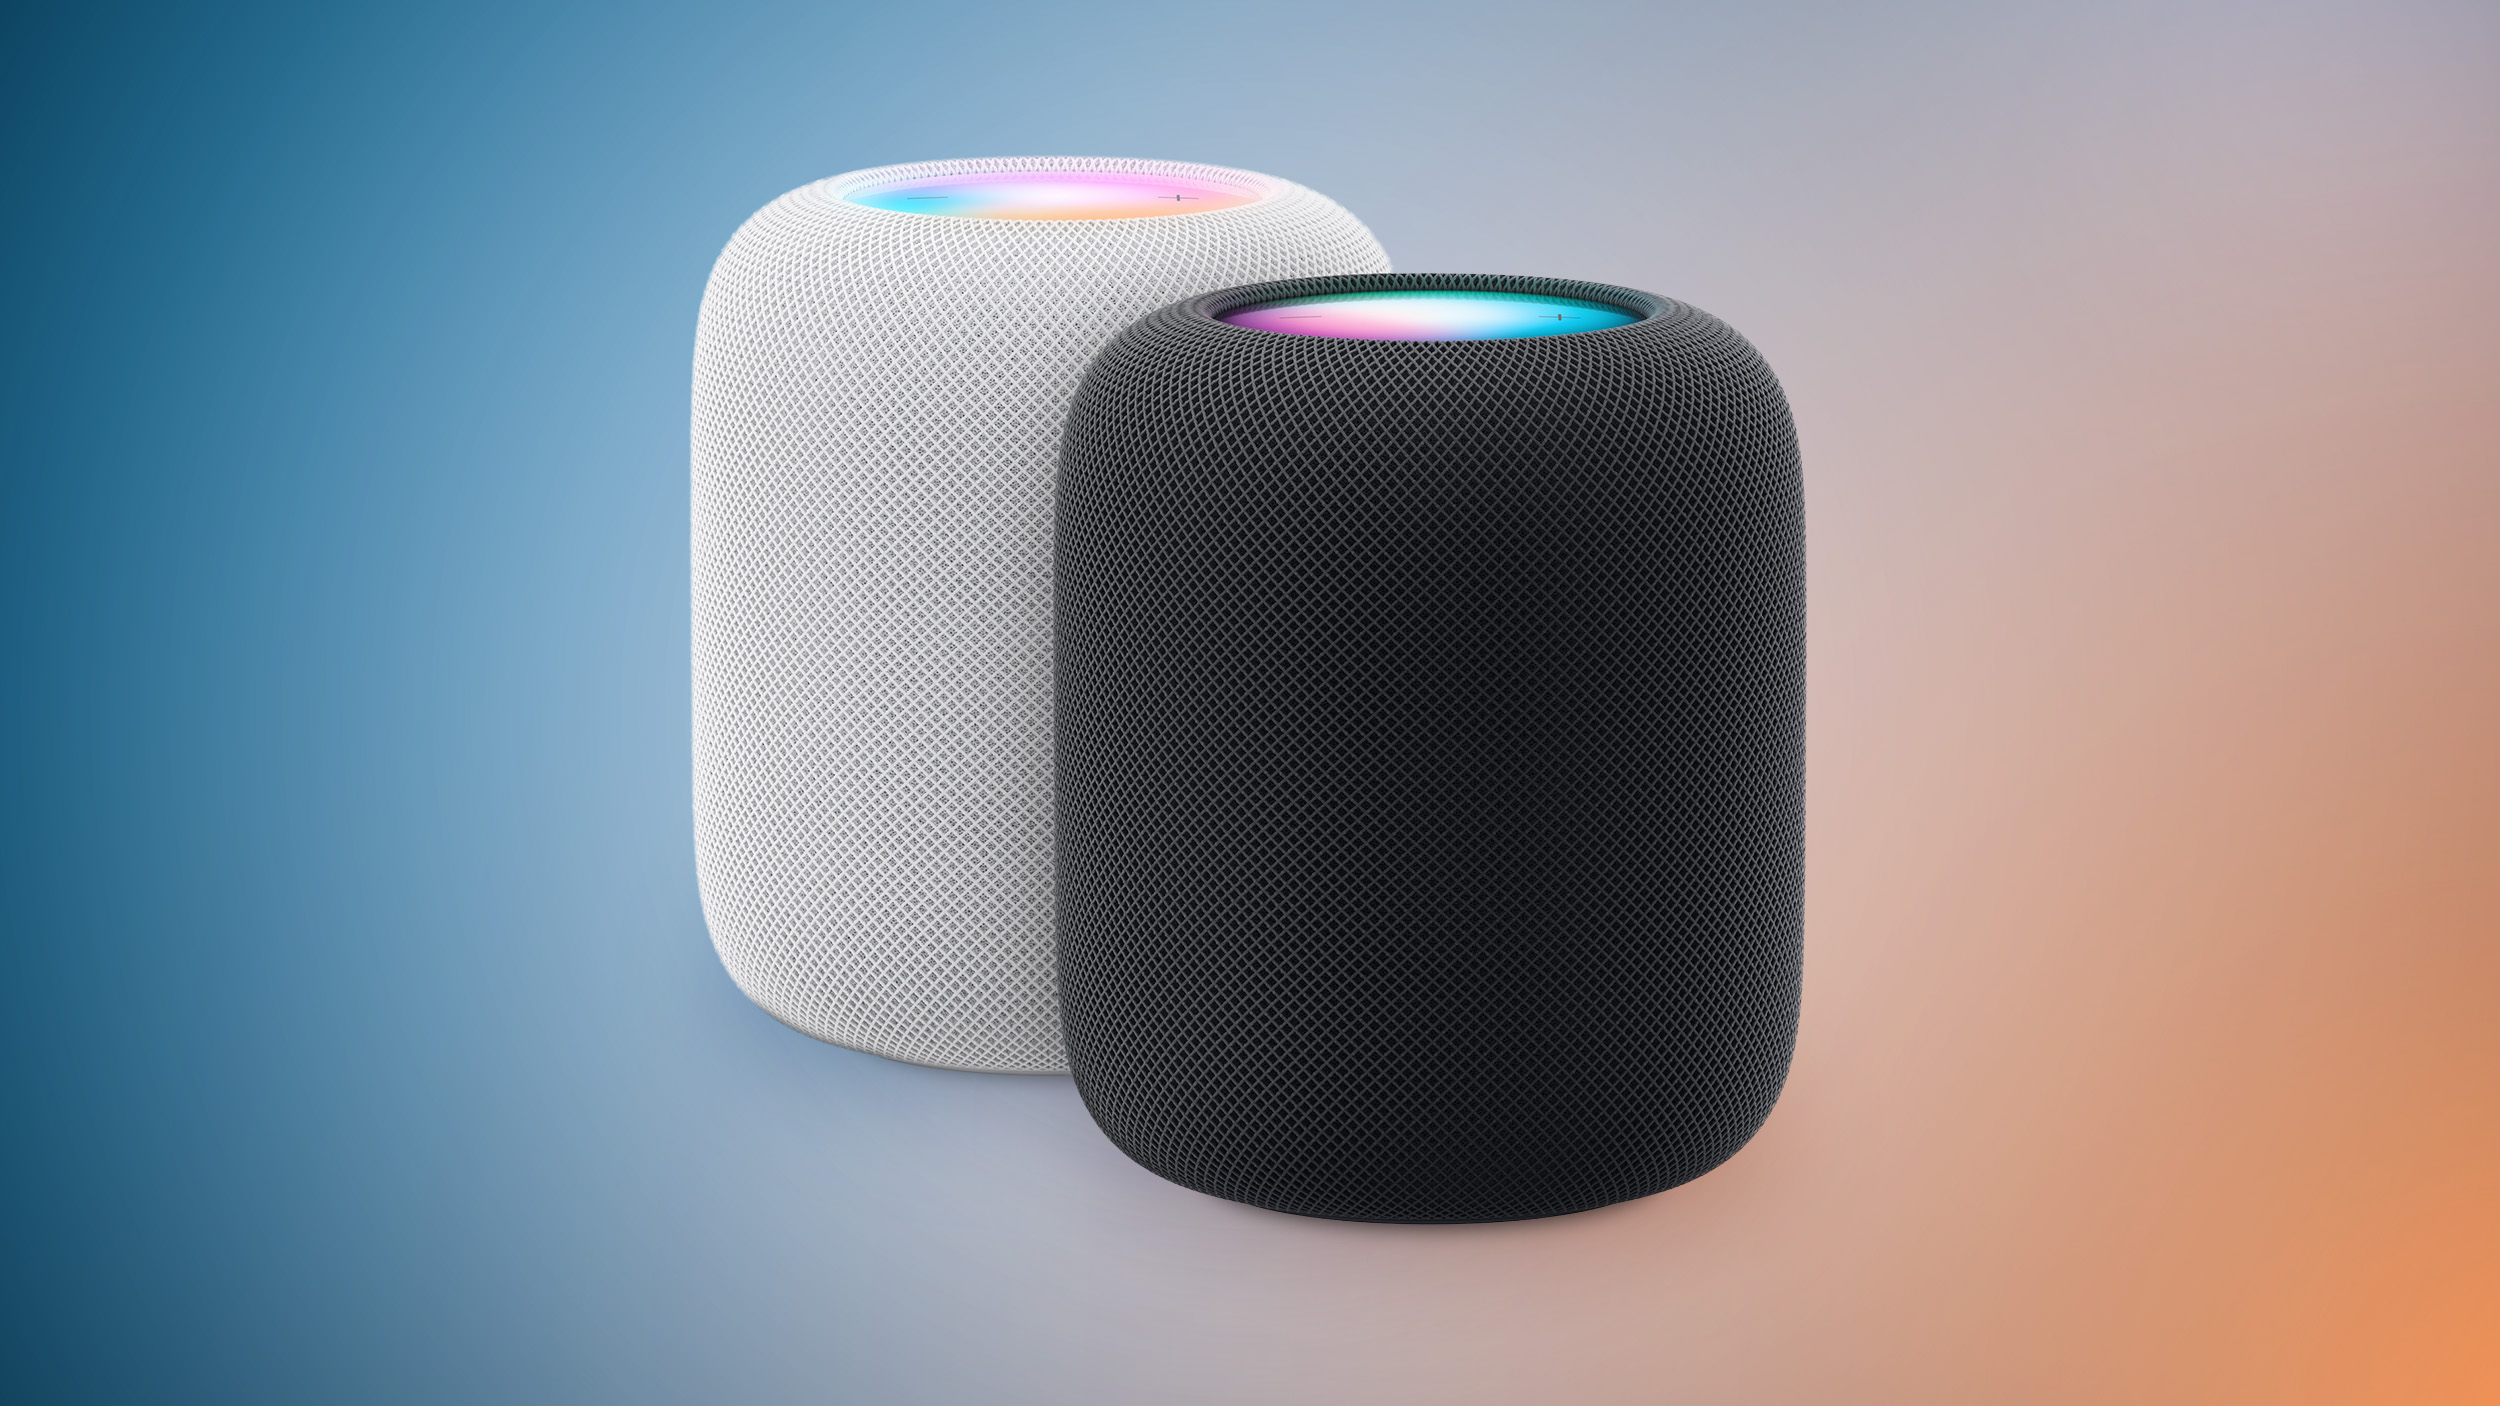 Apple Releases HomePod 16.3.2 Software With Fix for Siri Request Failures